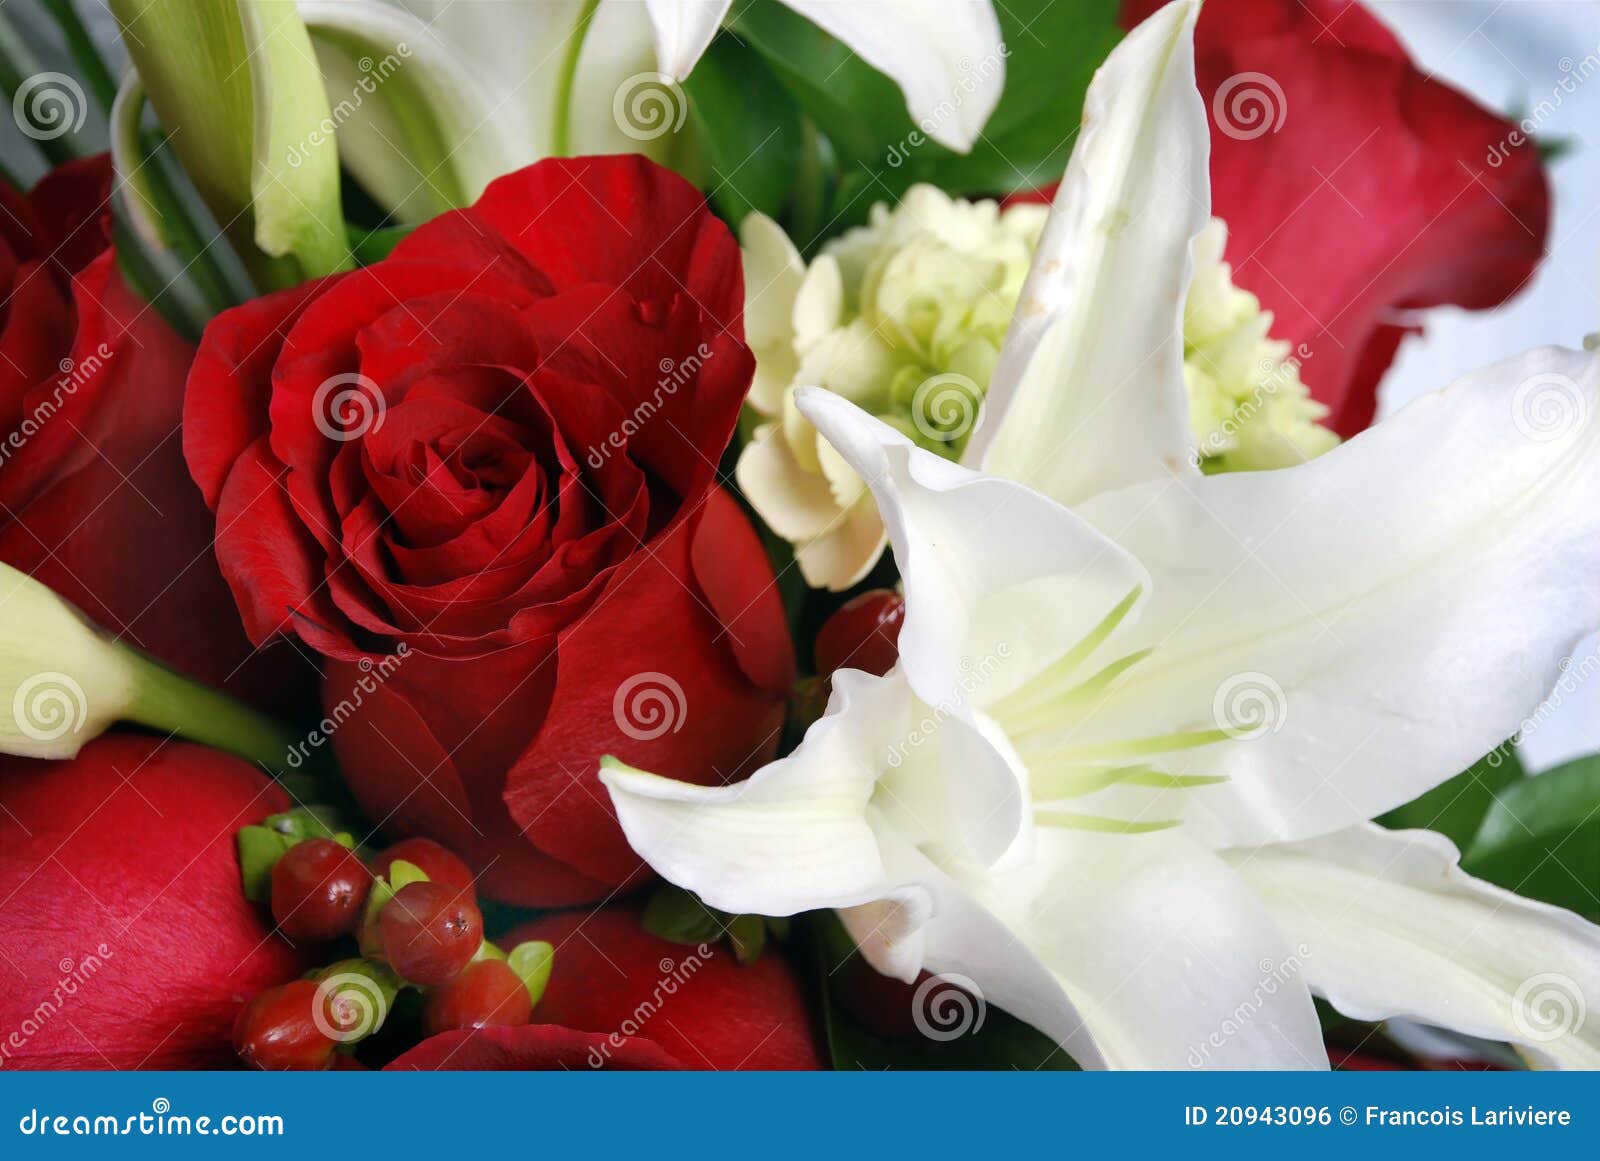 Bunch of Flowers, Red Roses and White Lys Stock Photo - Image of creative,  bouquet: 20943096